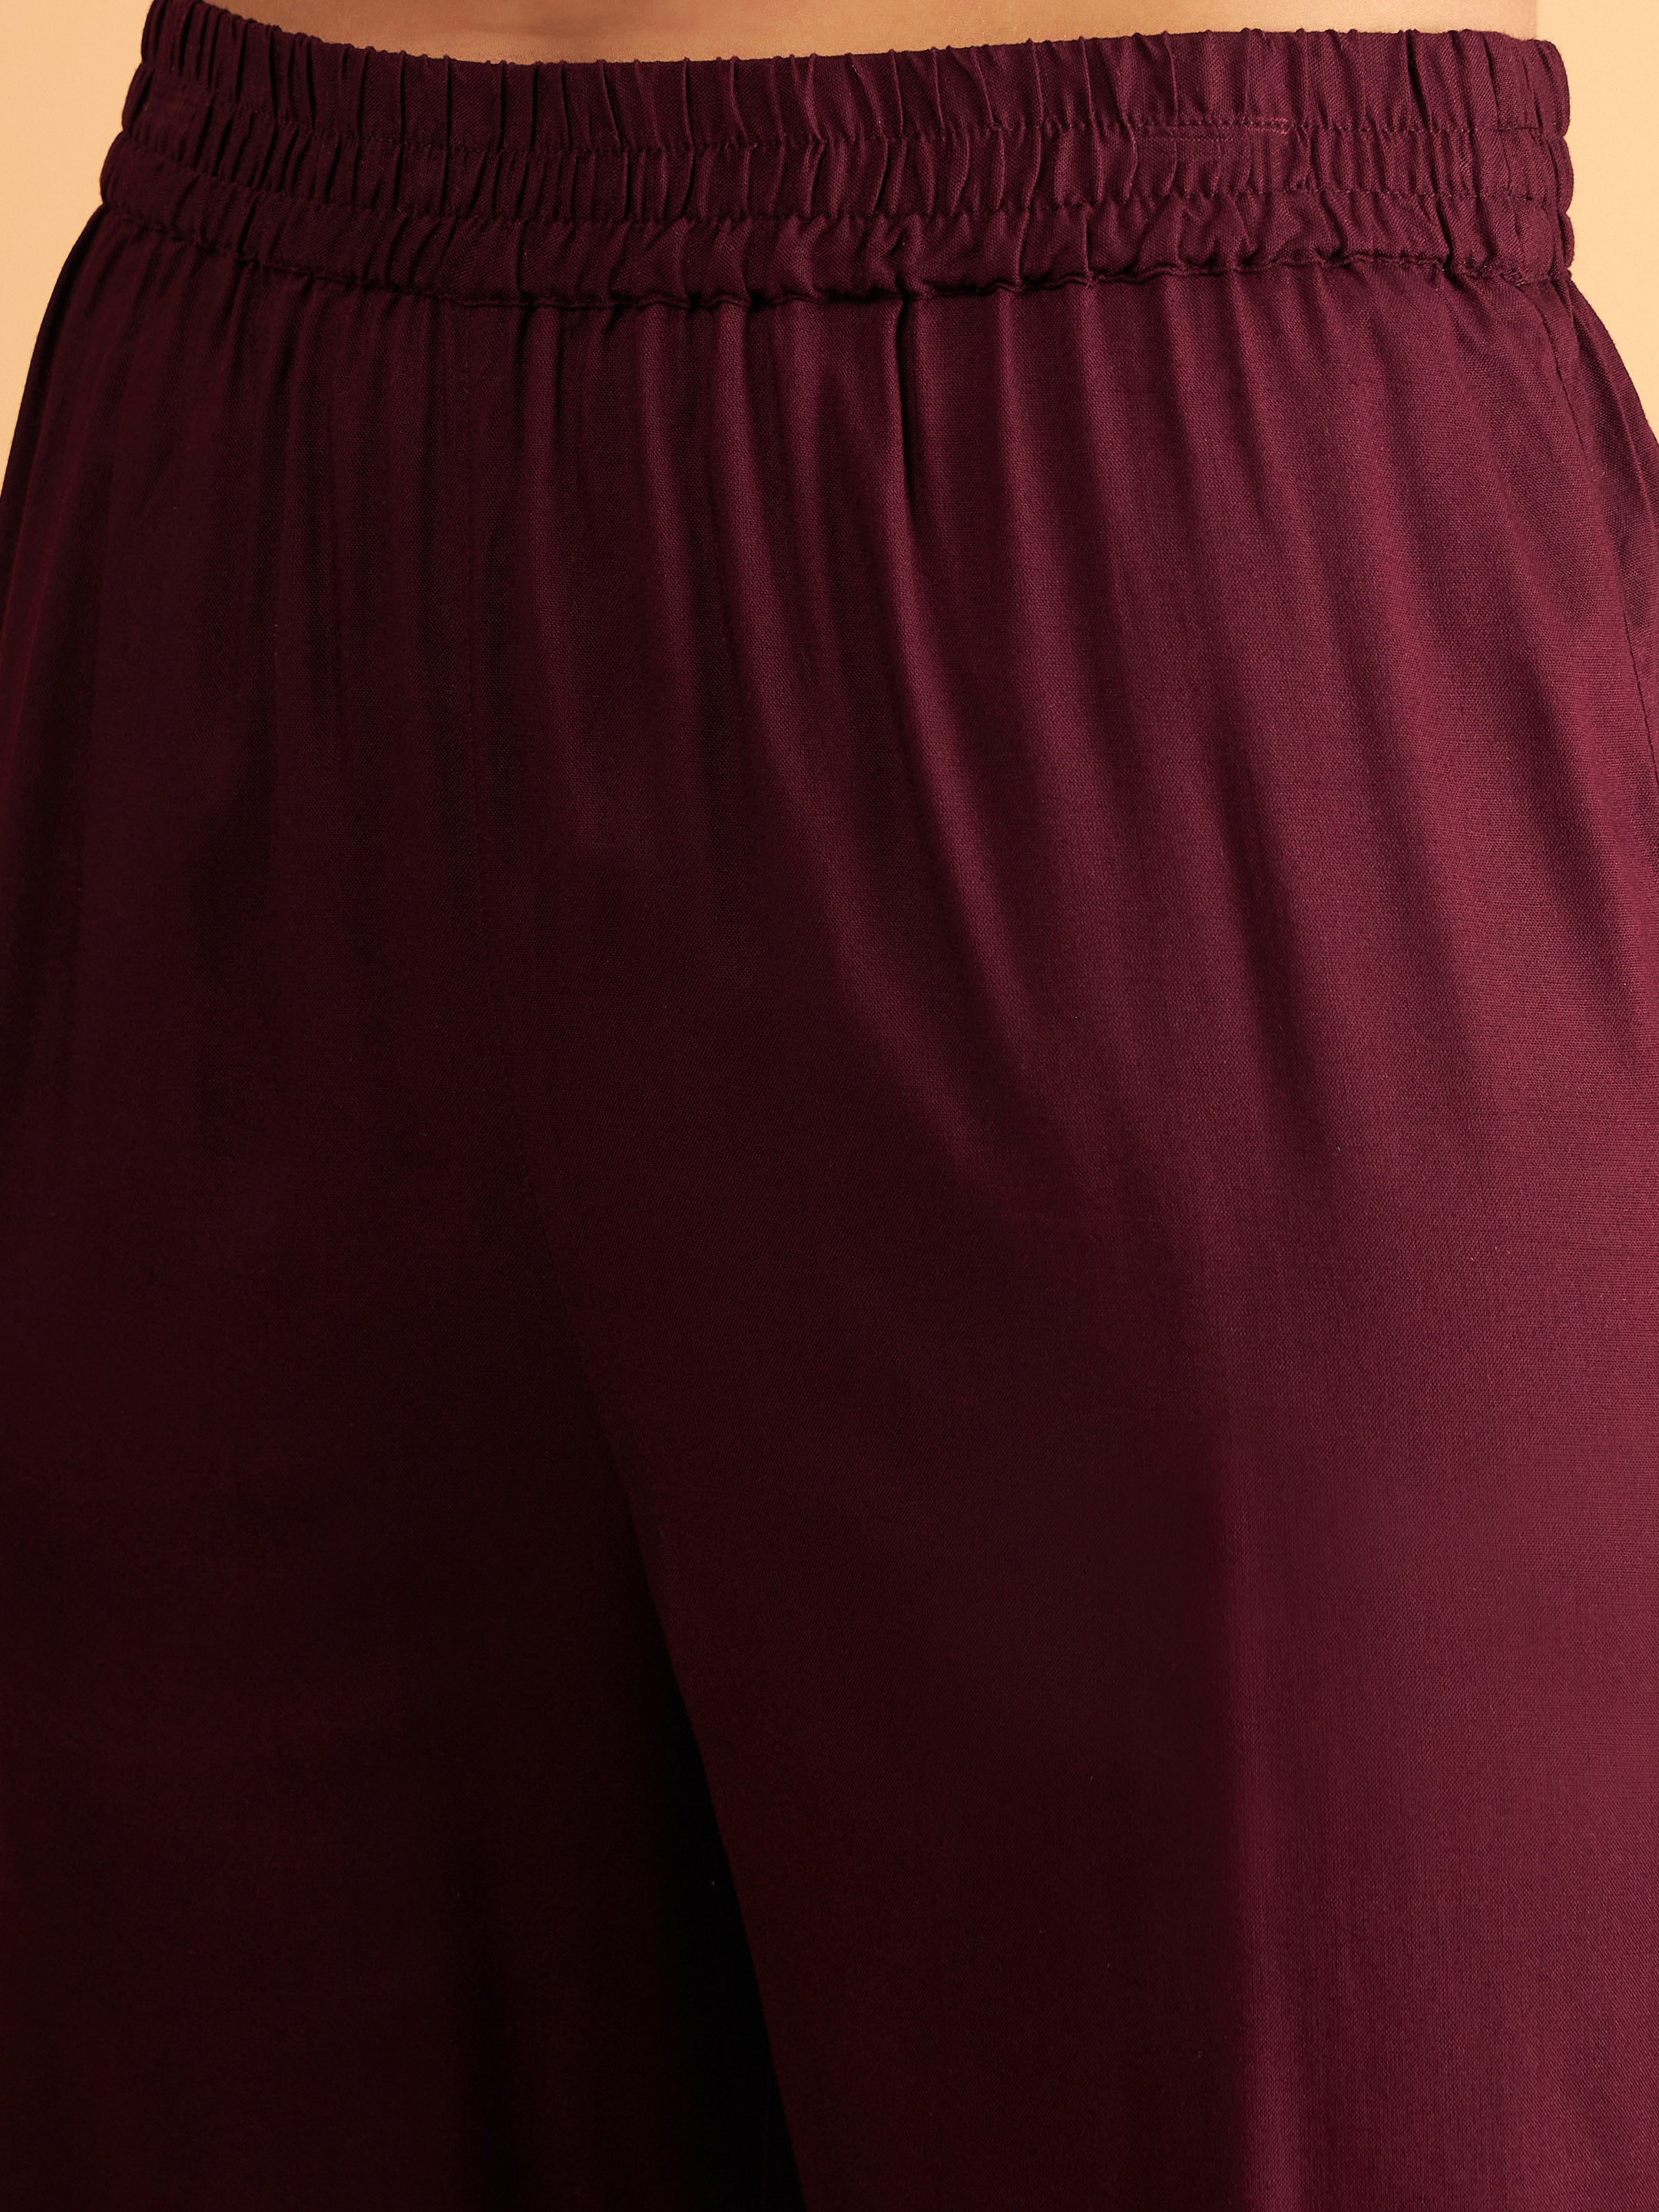 Women's Burgundy Embroidered A Line Top With Pants - Lyush